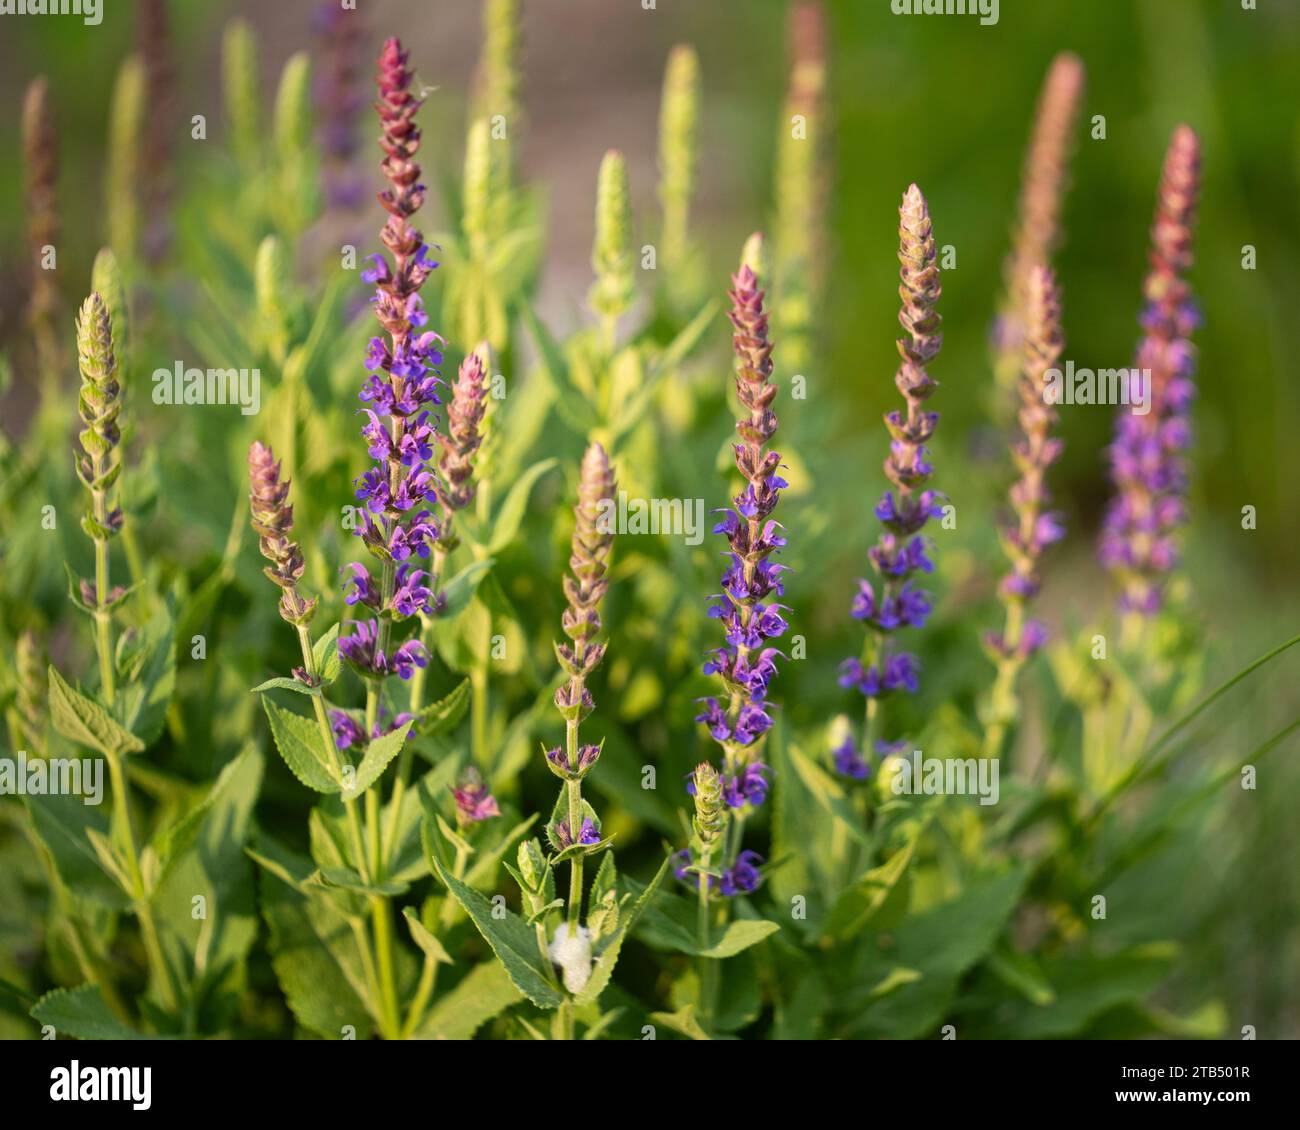 Purple salvia flowers against a blurred out background Stock Photo